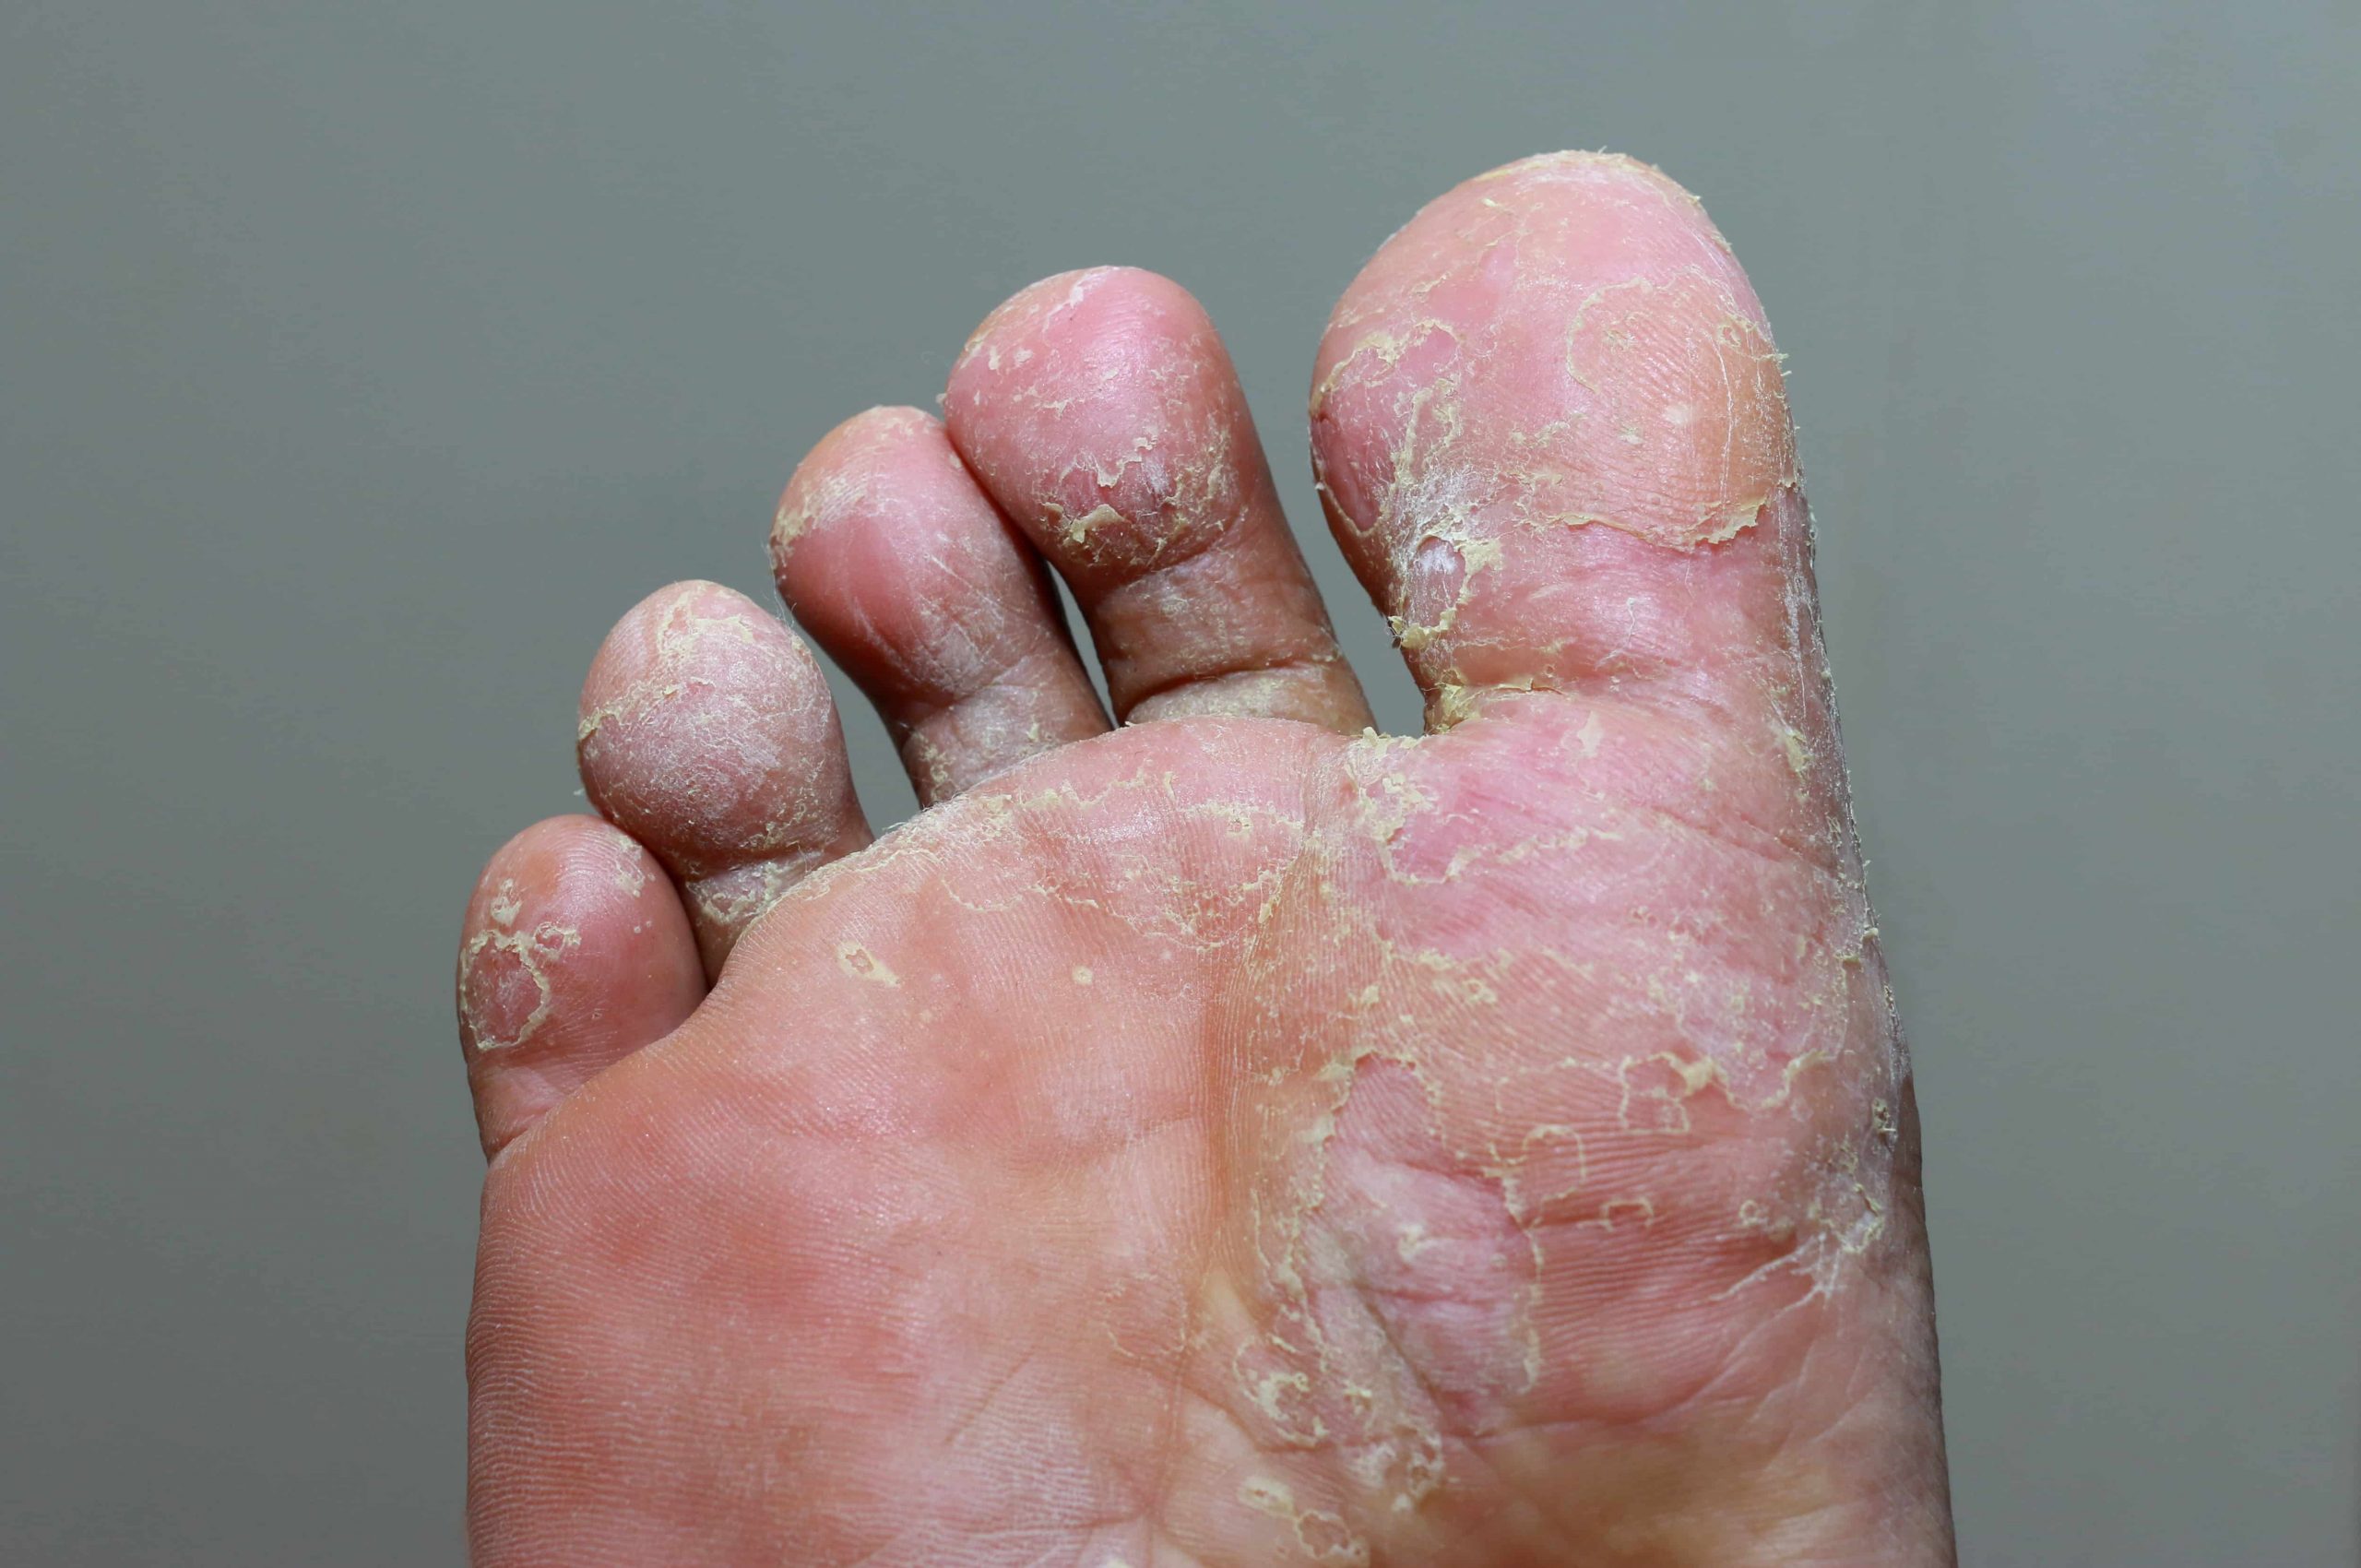 Types of Fungal Foot Infections - JAWS podiatry